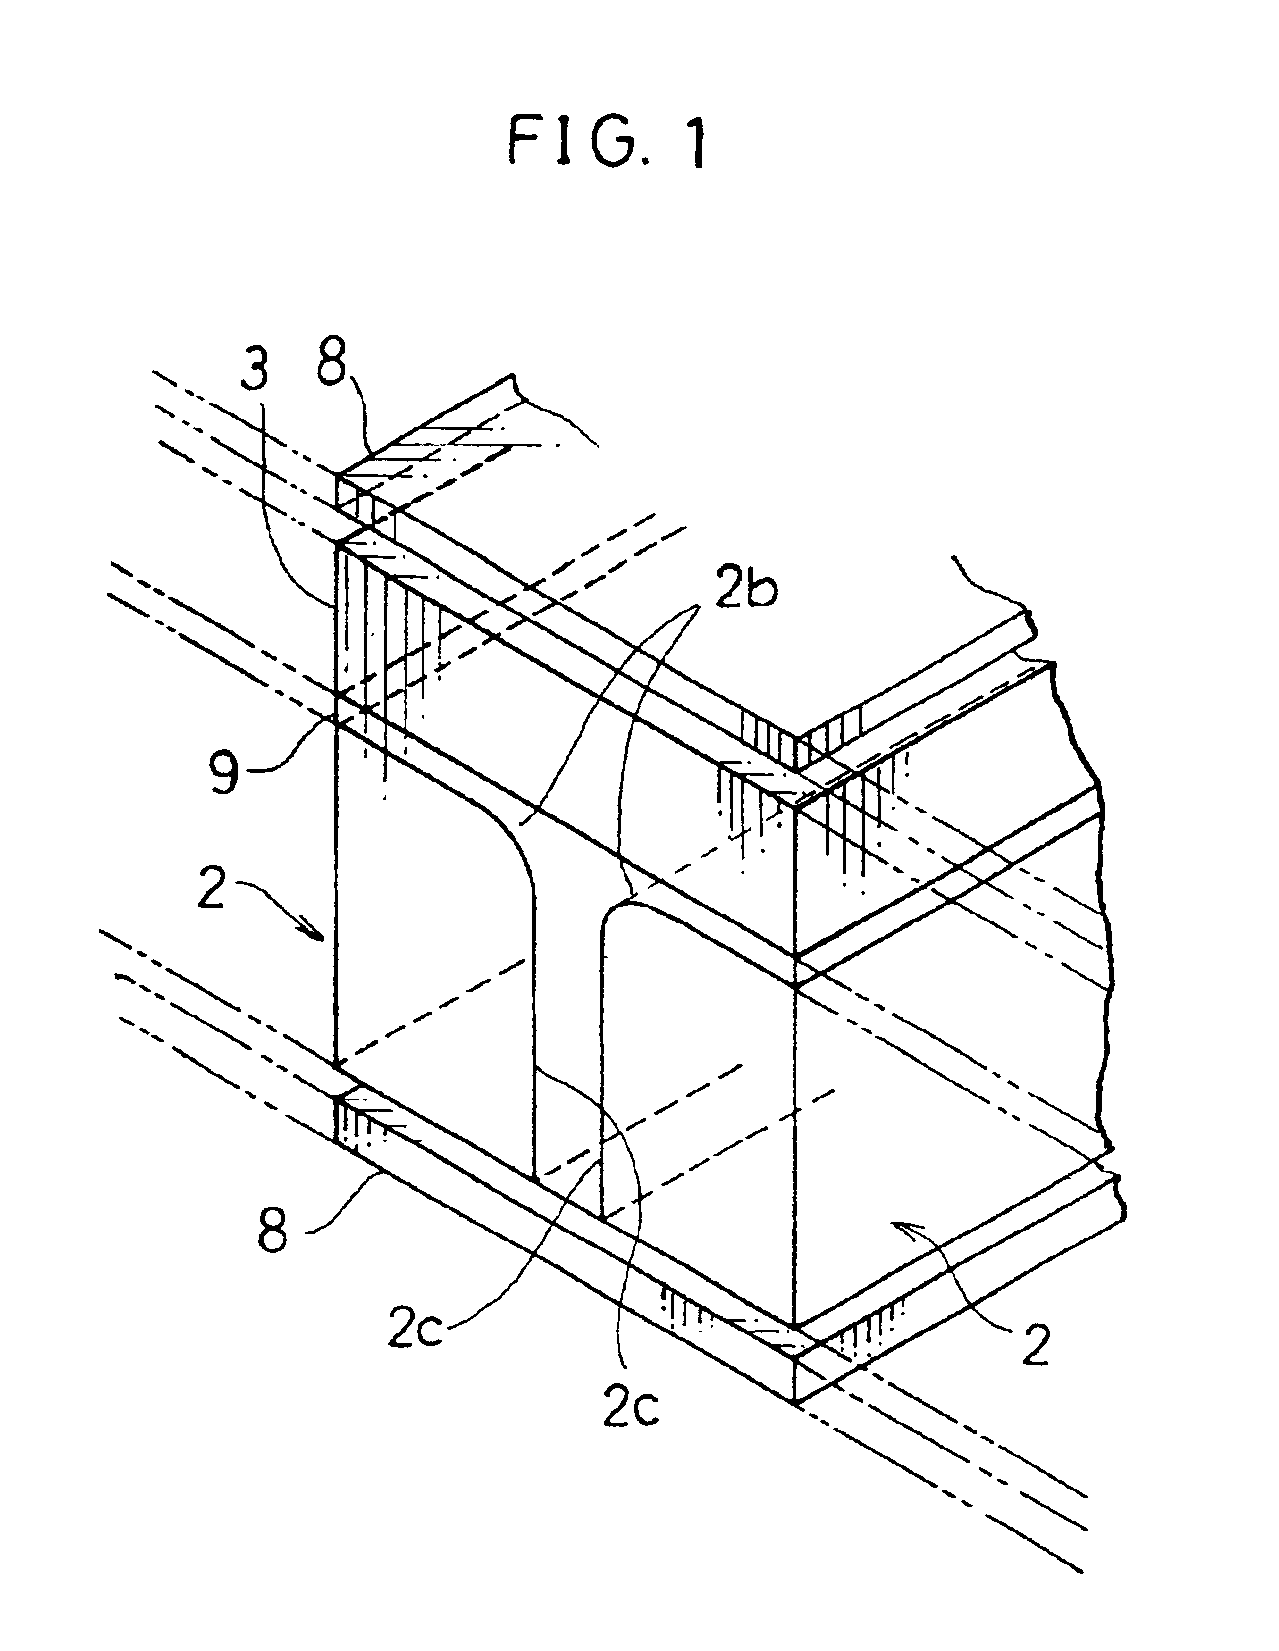 Display device utilizing a plurality of adjoining display panels to form single display screen and methods related thereto